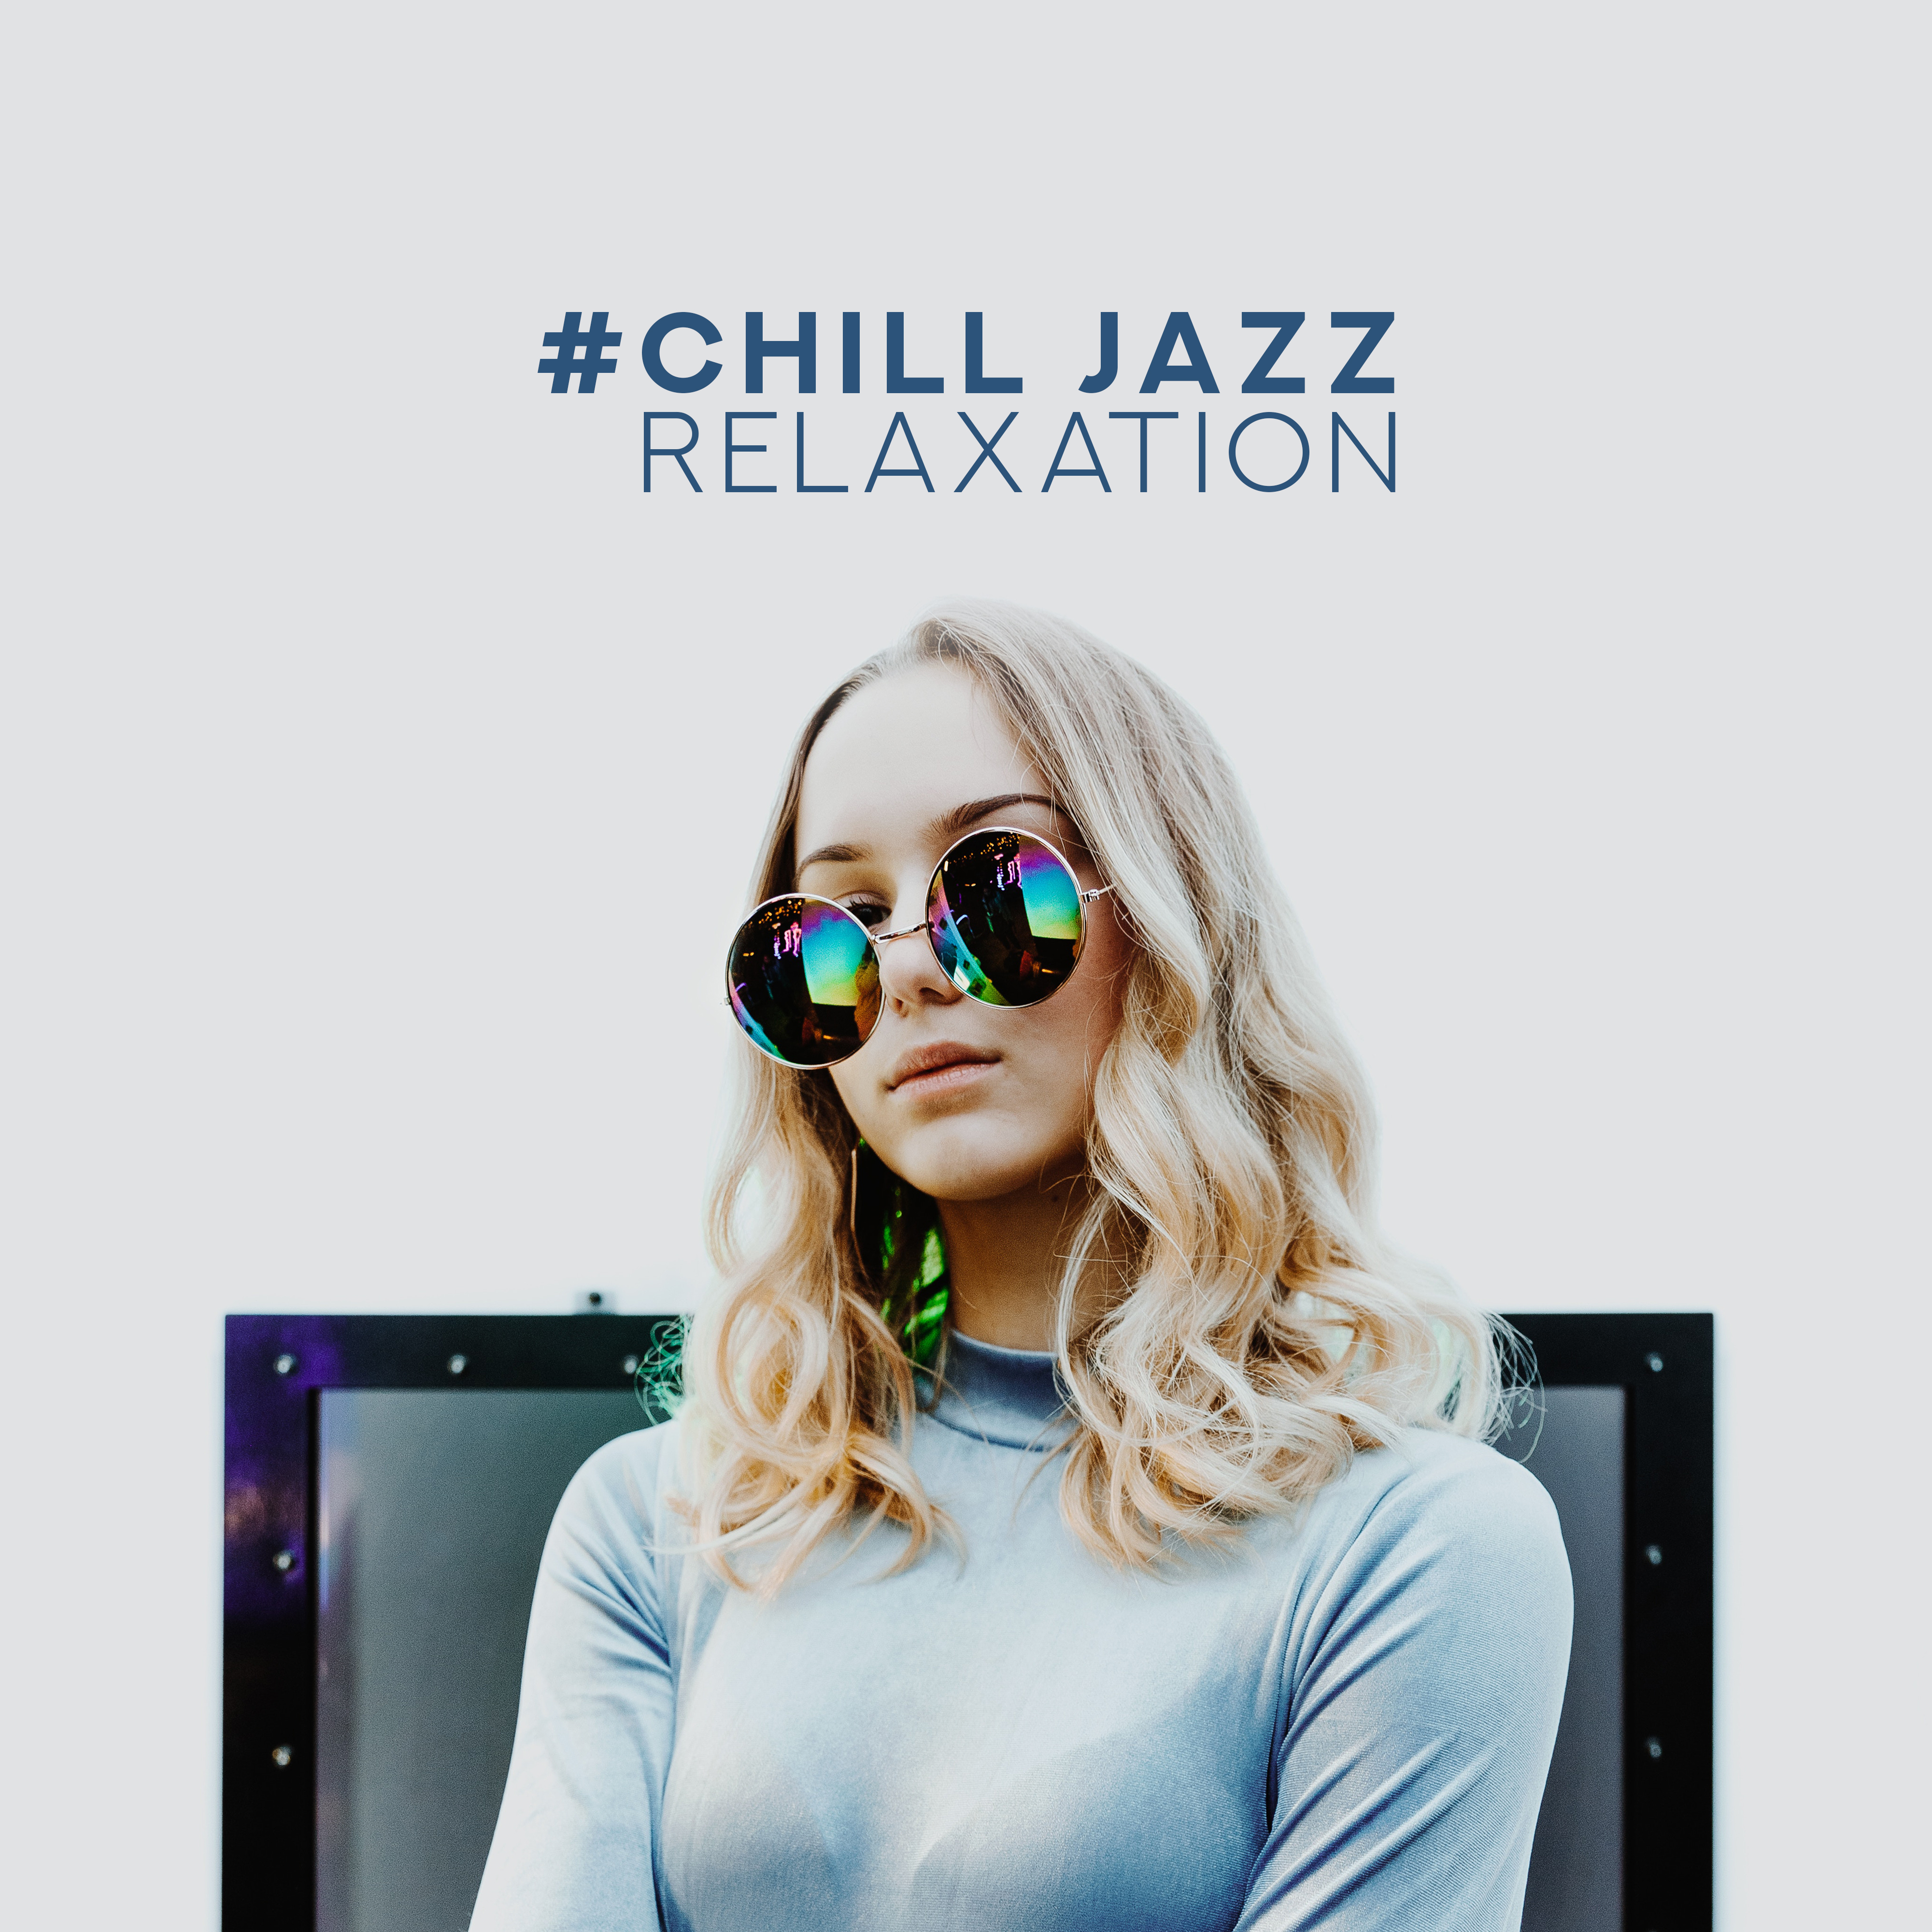 #Chill Jazz Relaxation – Classical Jazz, Mellow Jazz Music for Restaurant, Relaxation, Calm Down, Dinner Songs, Jazz Coffee, Therapeutic Jazz